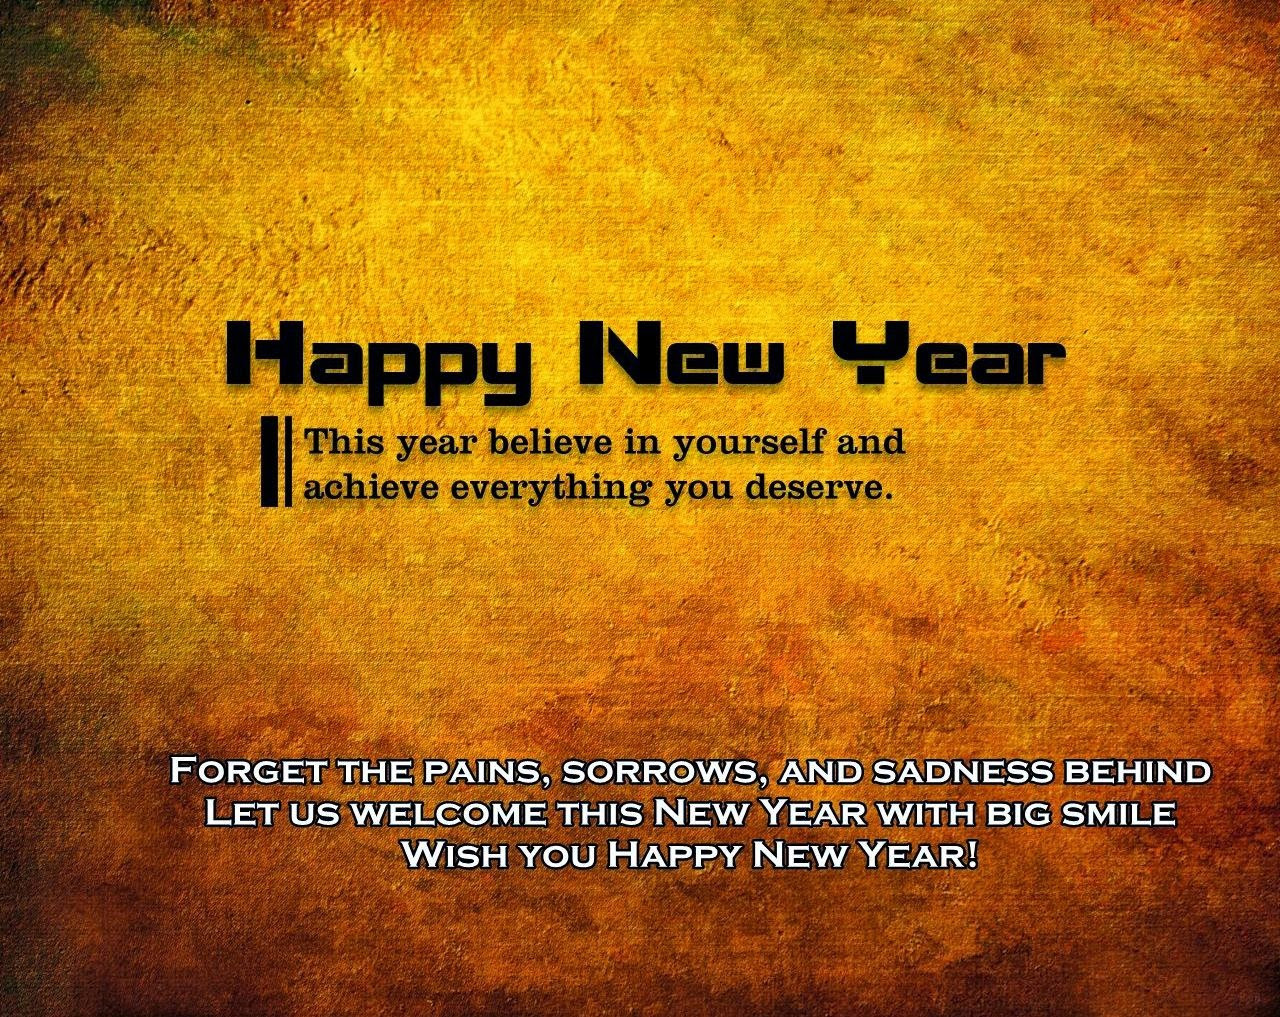 Happy New Year Inspirational Quotes
 Happy New Year 2015 Inspirational Quotes QuotesGram